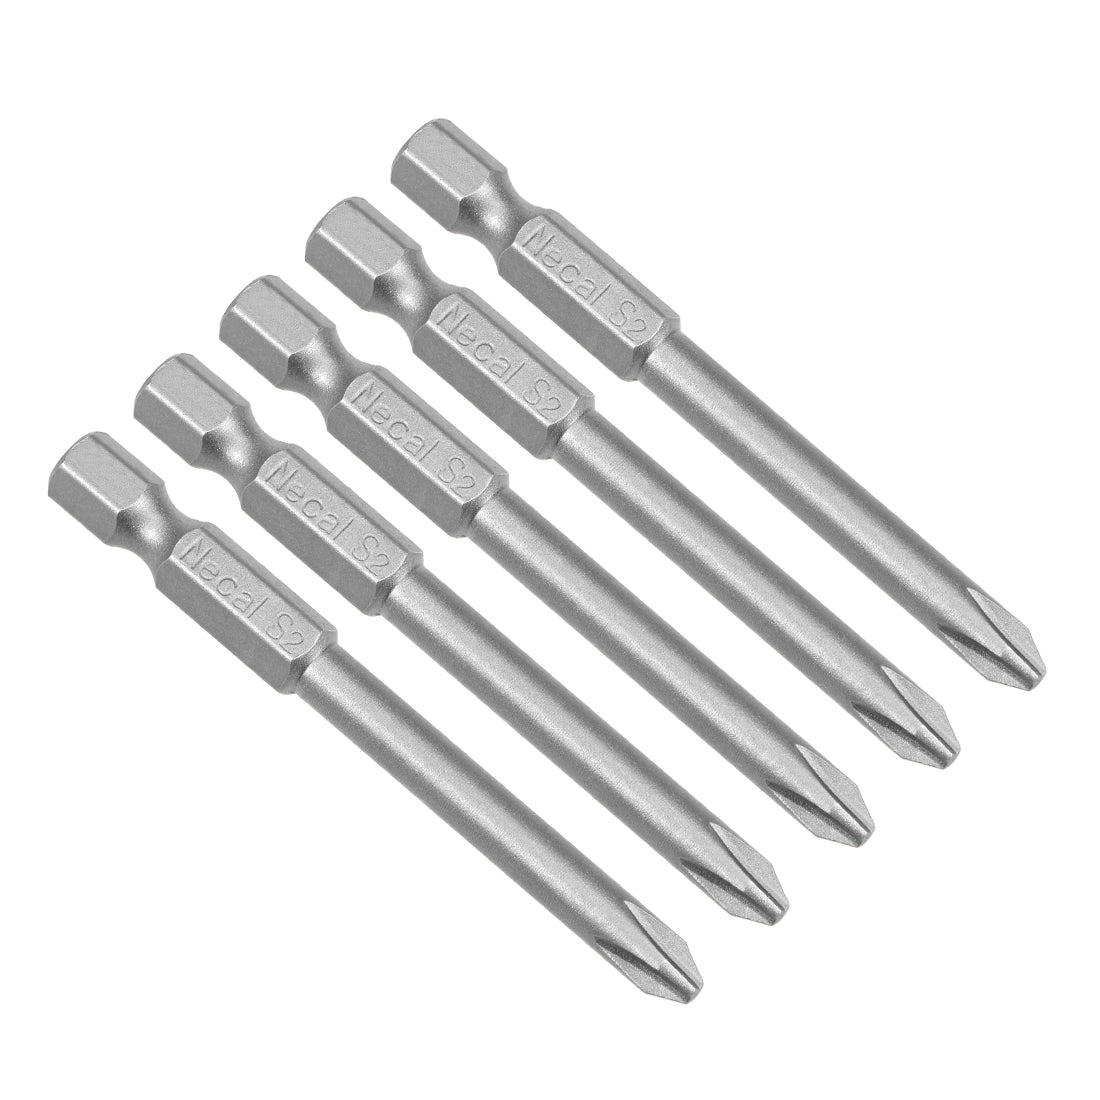 uxcell Uxcell 5 Pcs Magnetic Phillips Screwdriver Bits, Hex Shank S2 Power Tools